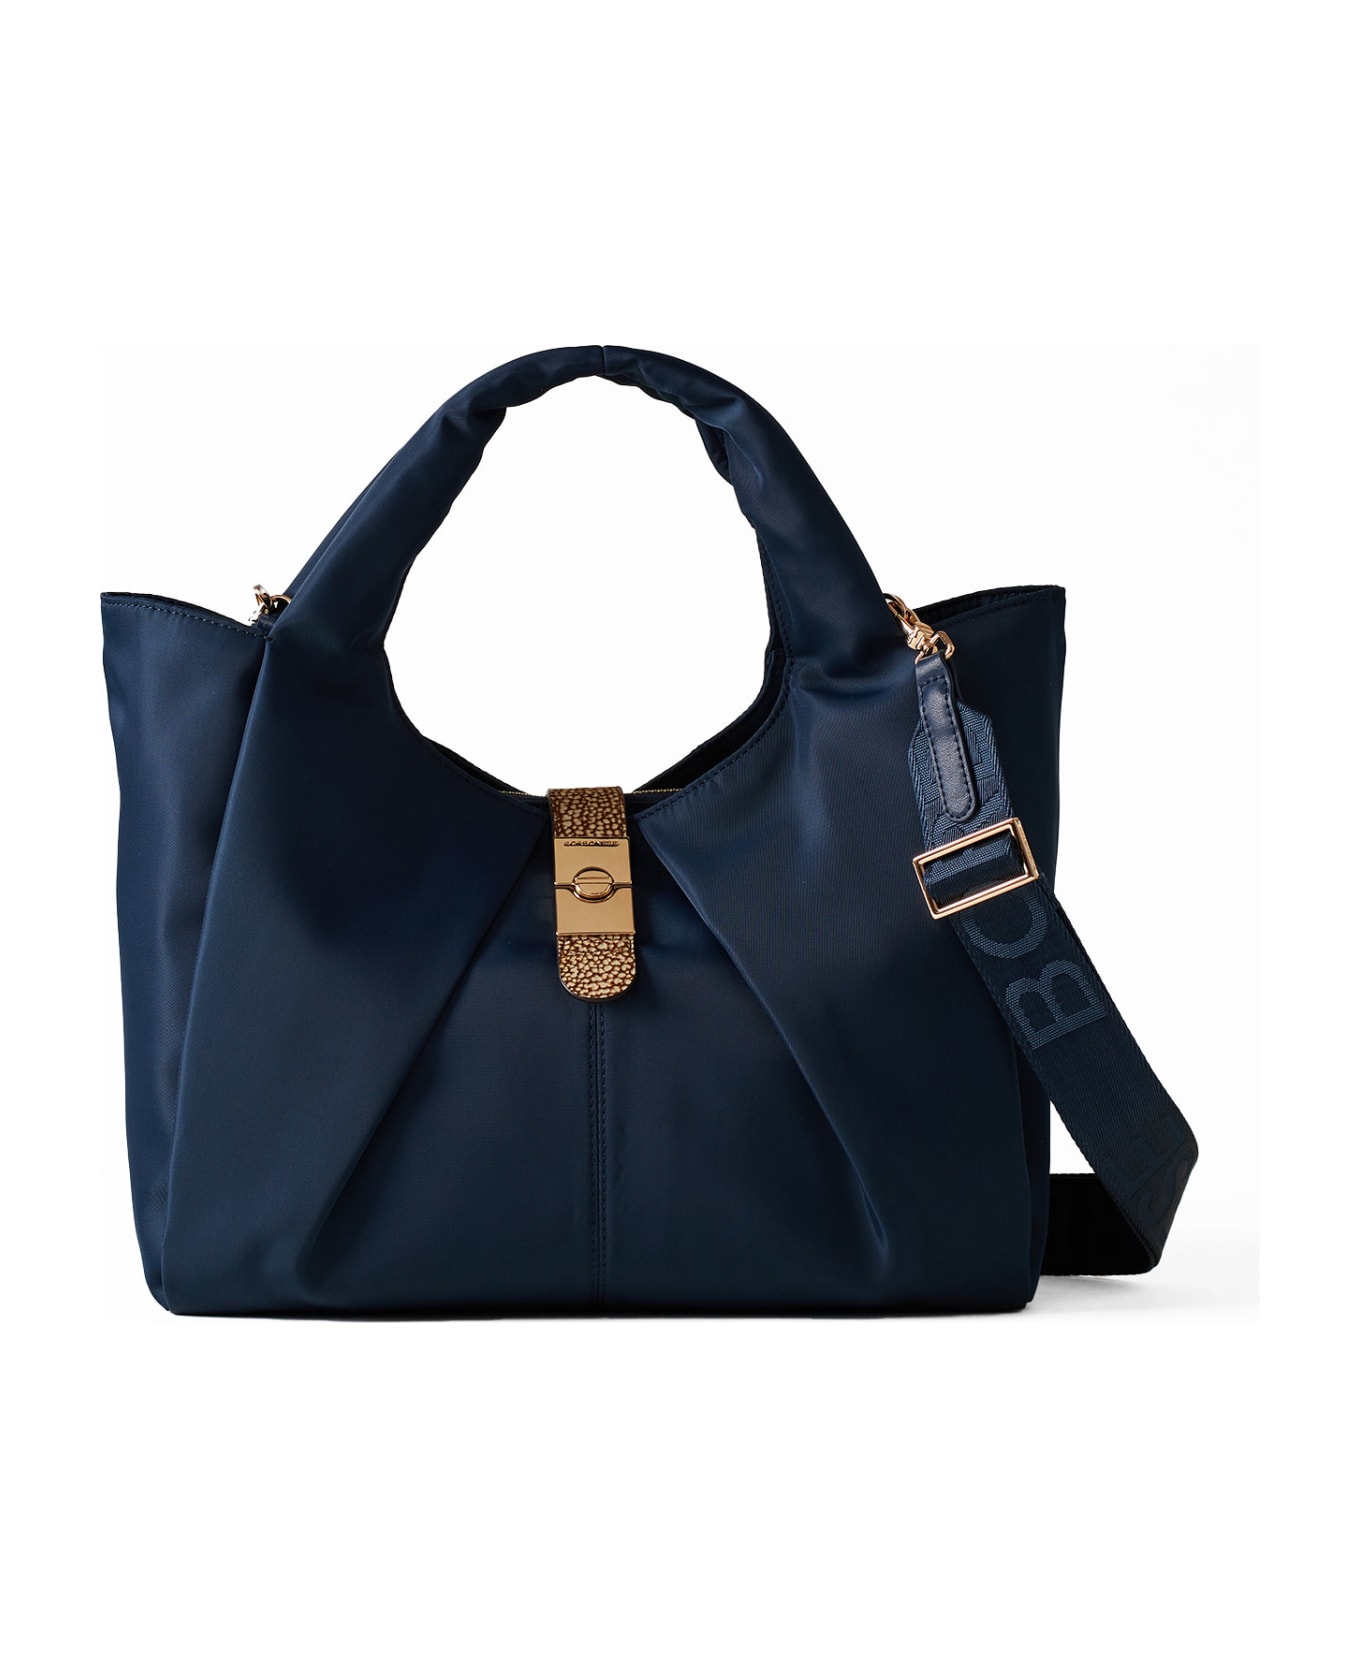 Borbonese Fabric And Leather Handbag With Shoulder Strap - BLU PRUSSIA/OP NAURALE トートバッグ